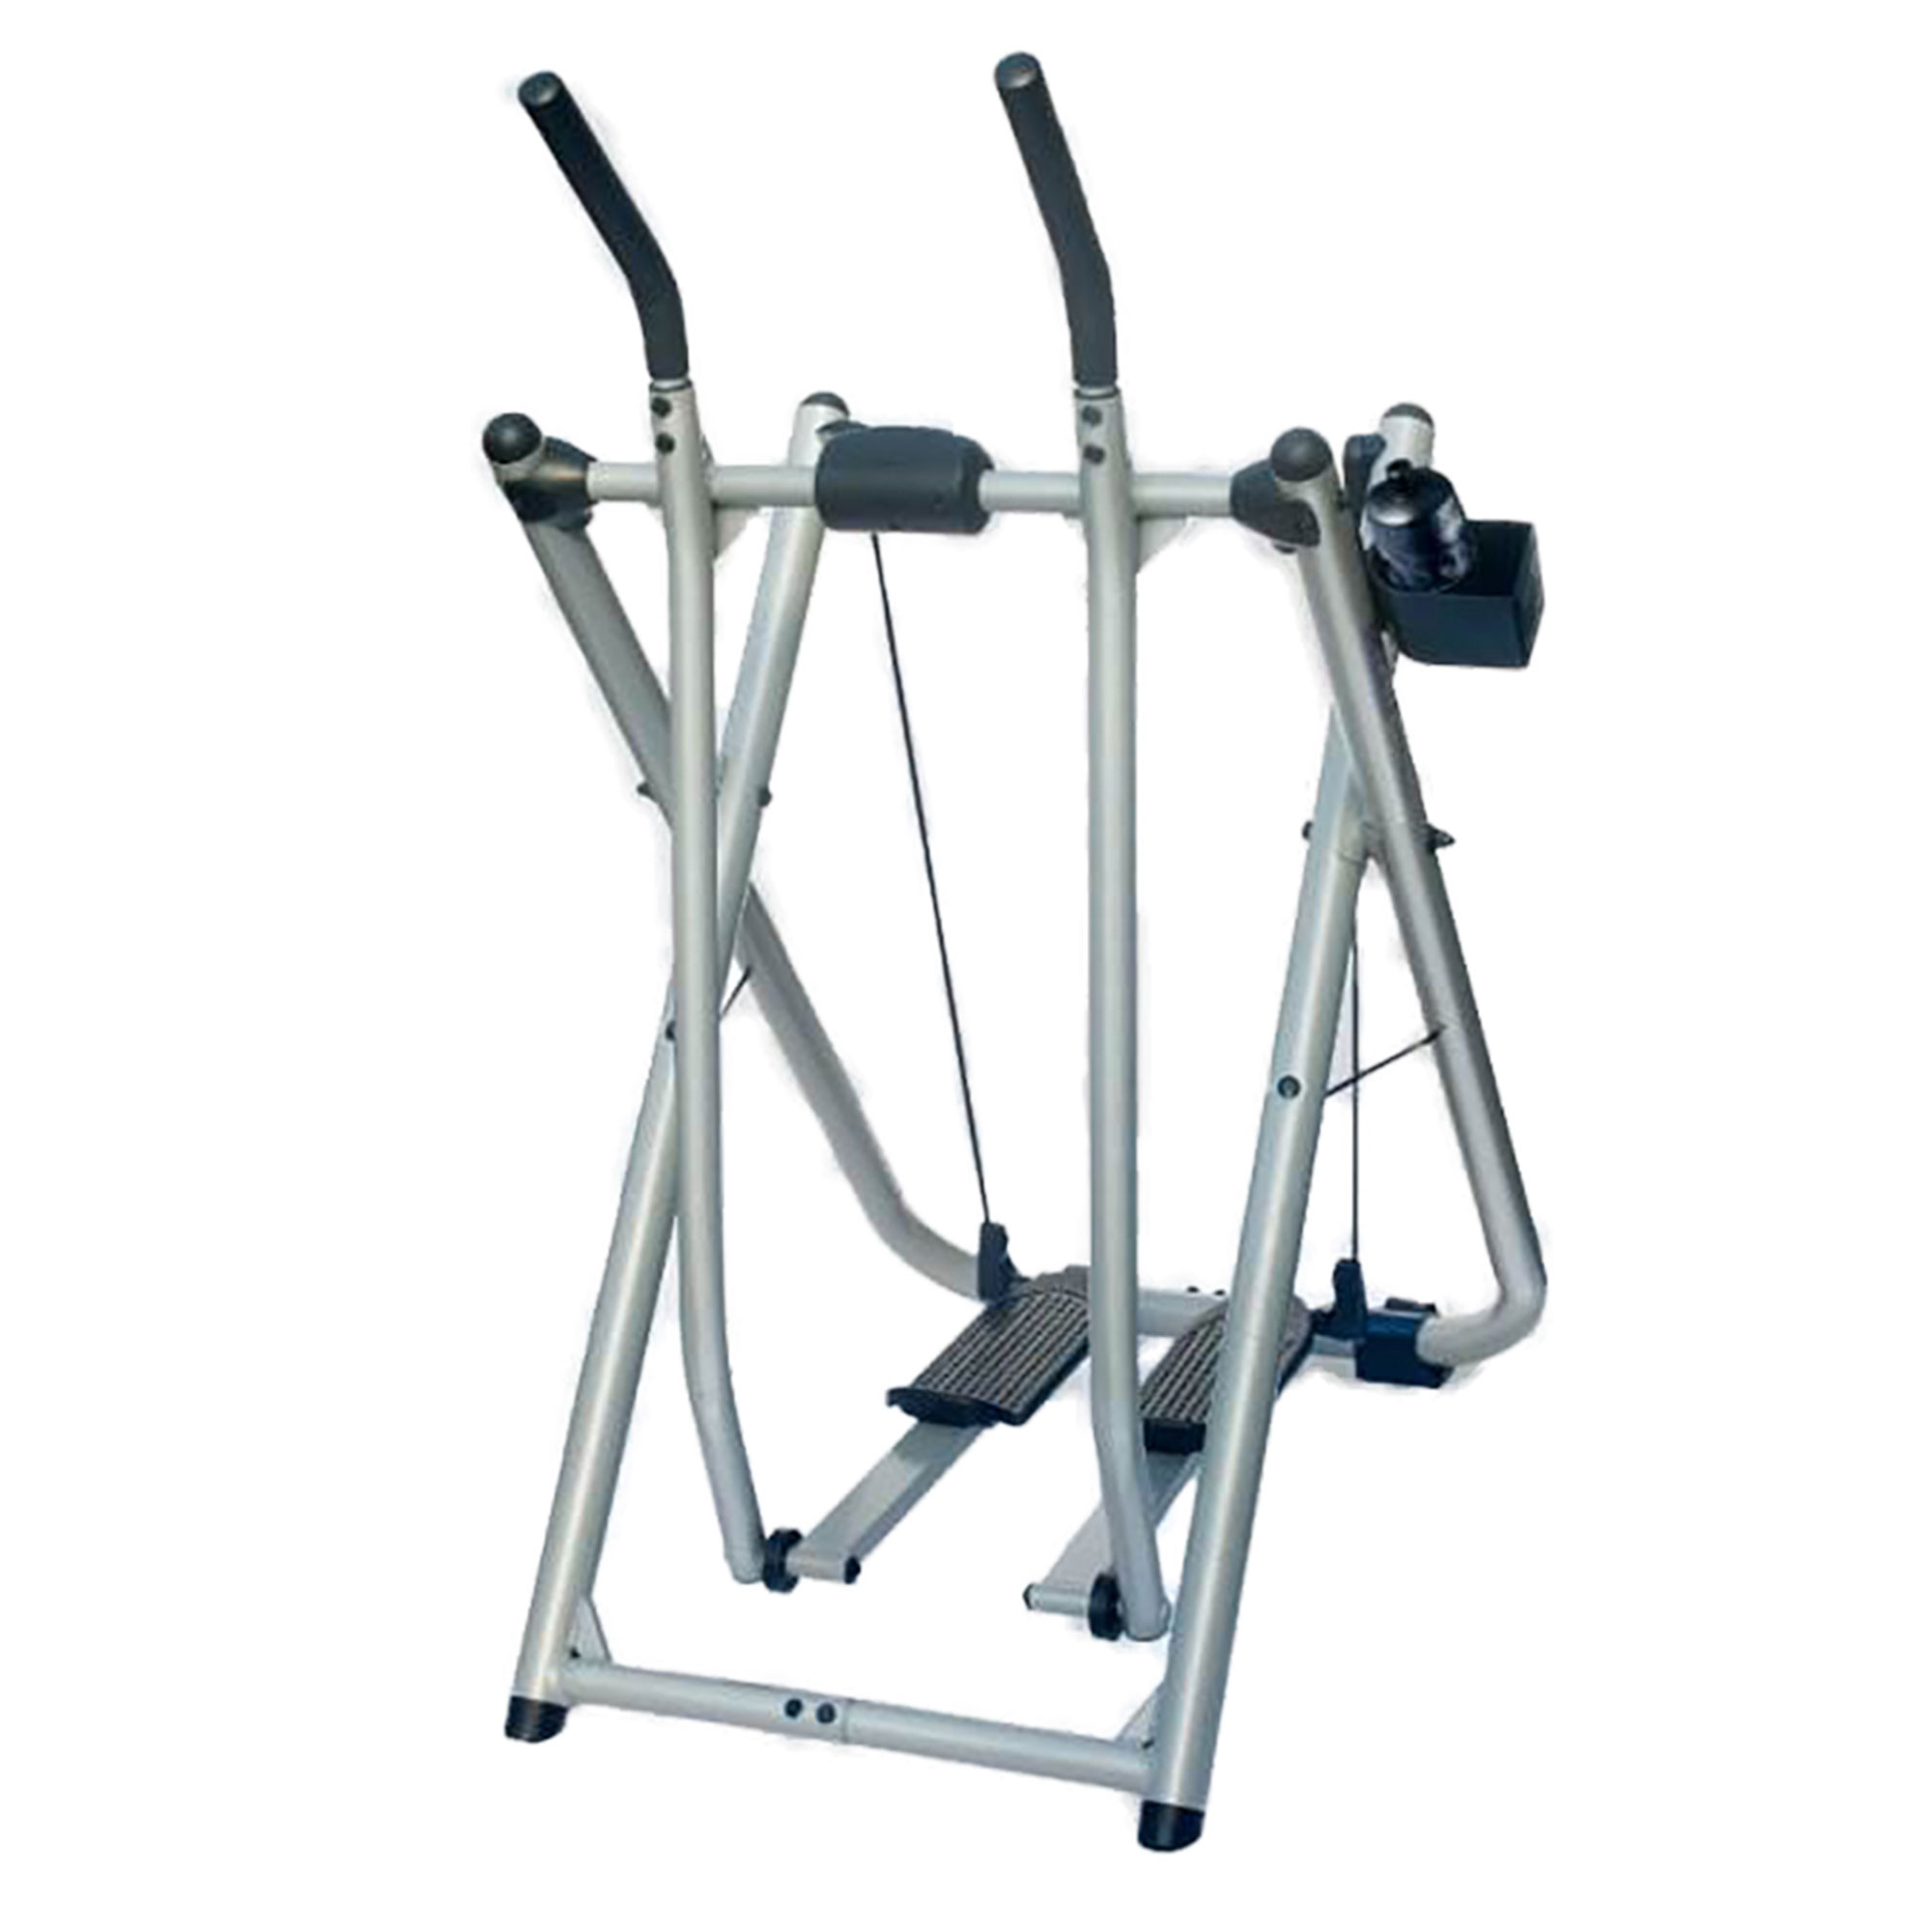 Gazelle Freestyle Glider Home Exercise Machine Equipment with Workout DVD - image 1 of 11